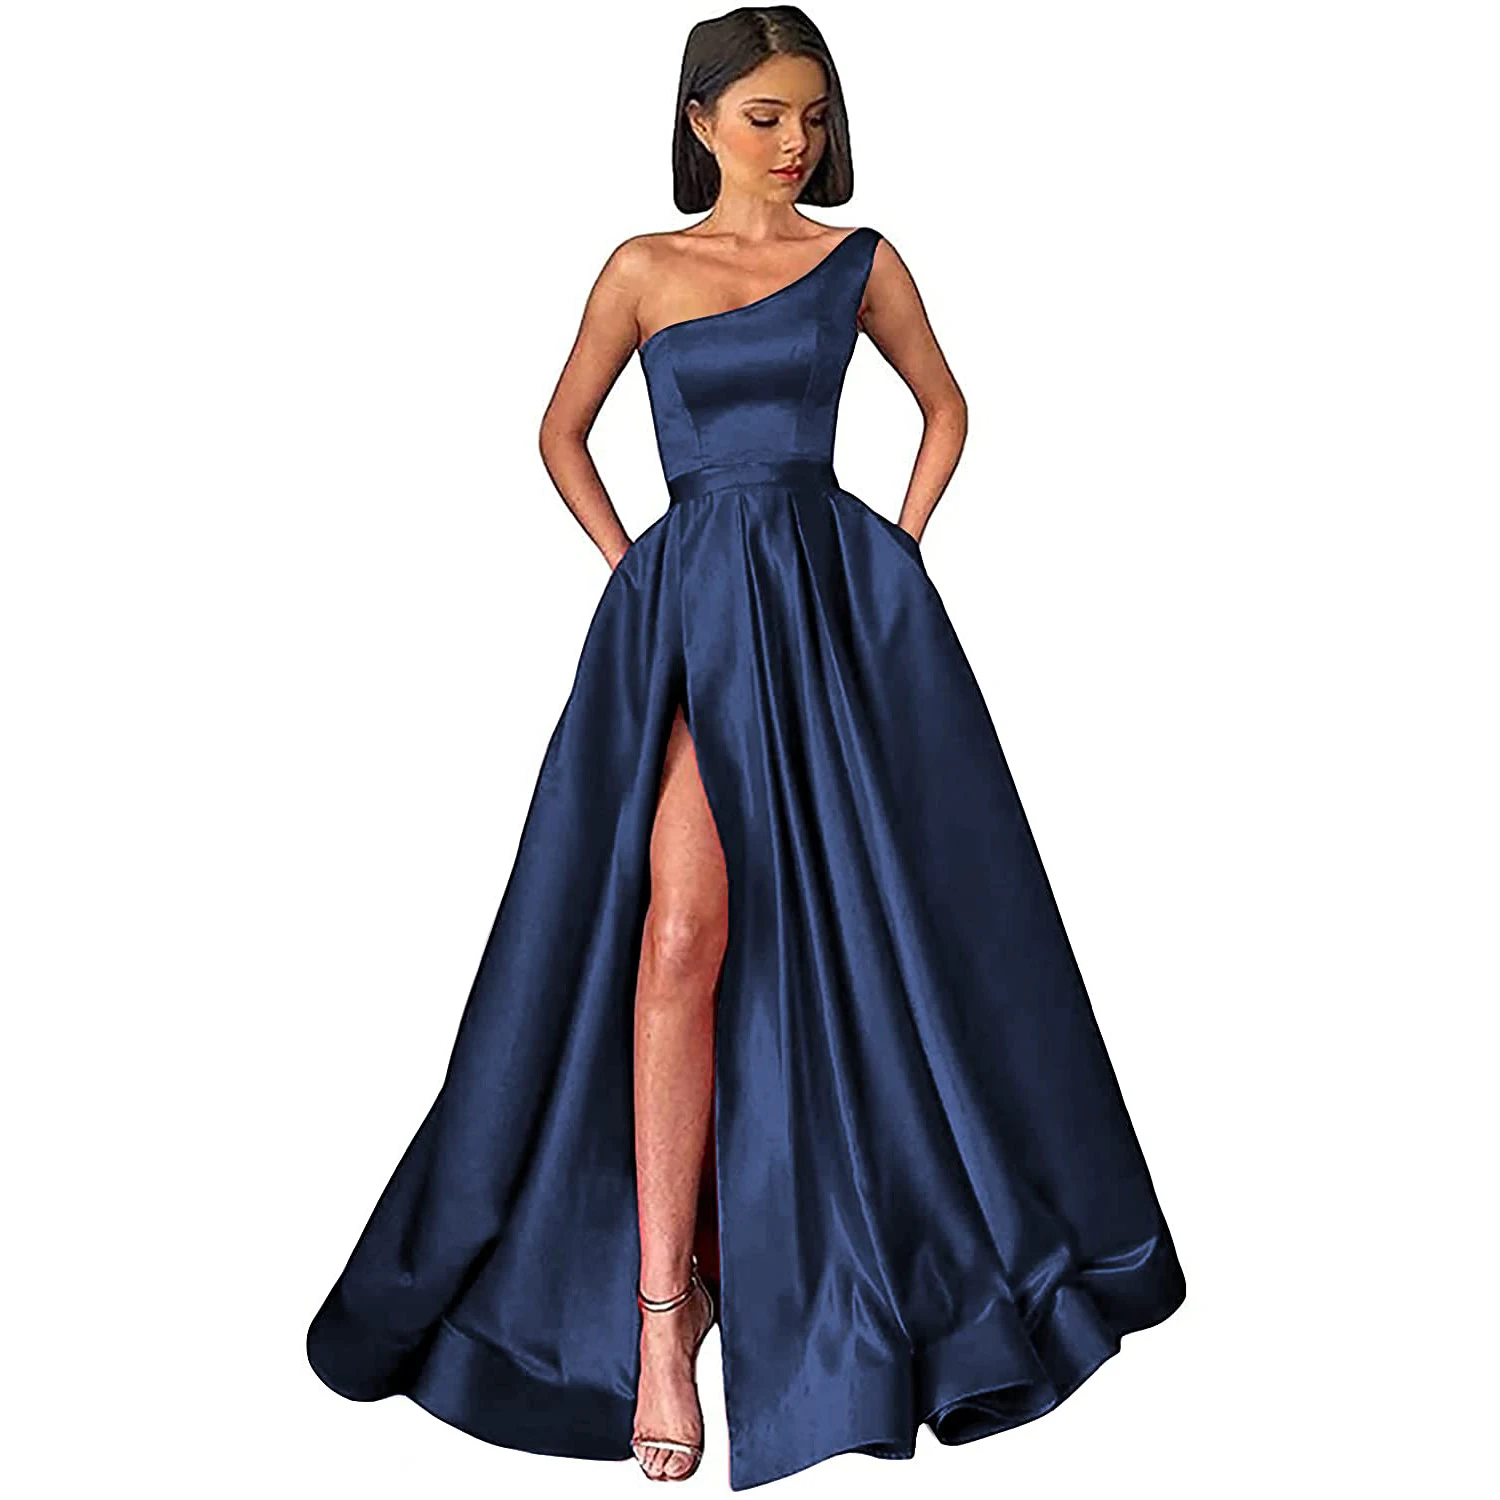 One Shoulder Evening Dresses Long Satin A Line فساتين السهرة Slit Party Prom Gown with Pockets for Women sexy evening gowns Evening Dresses